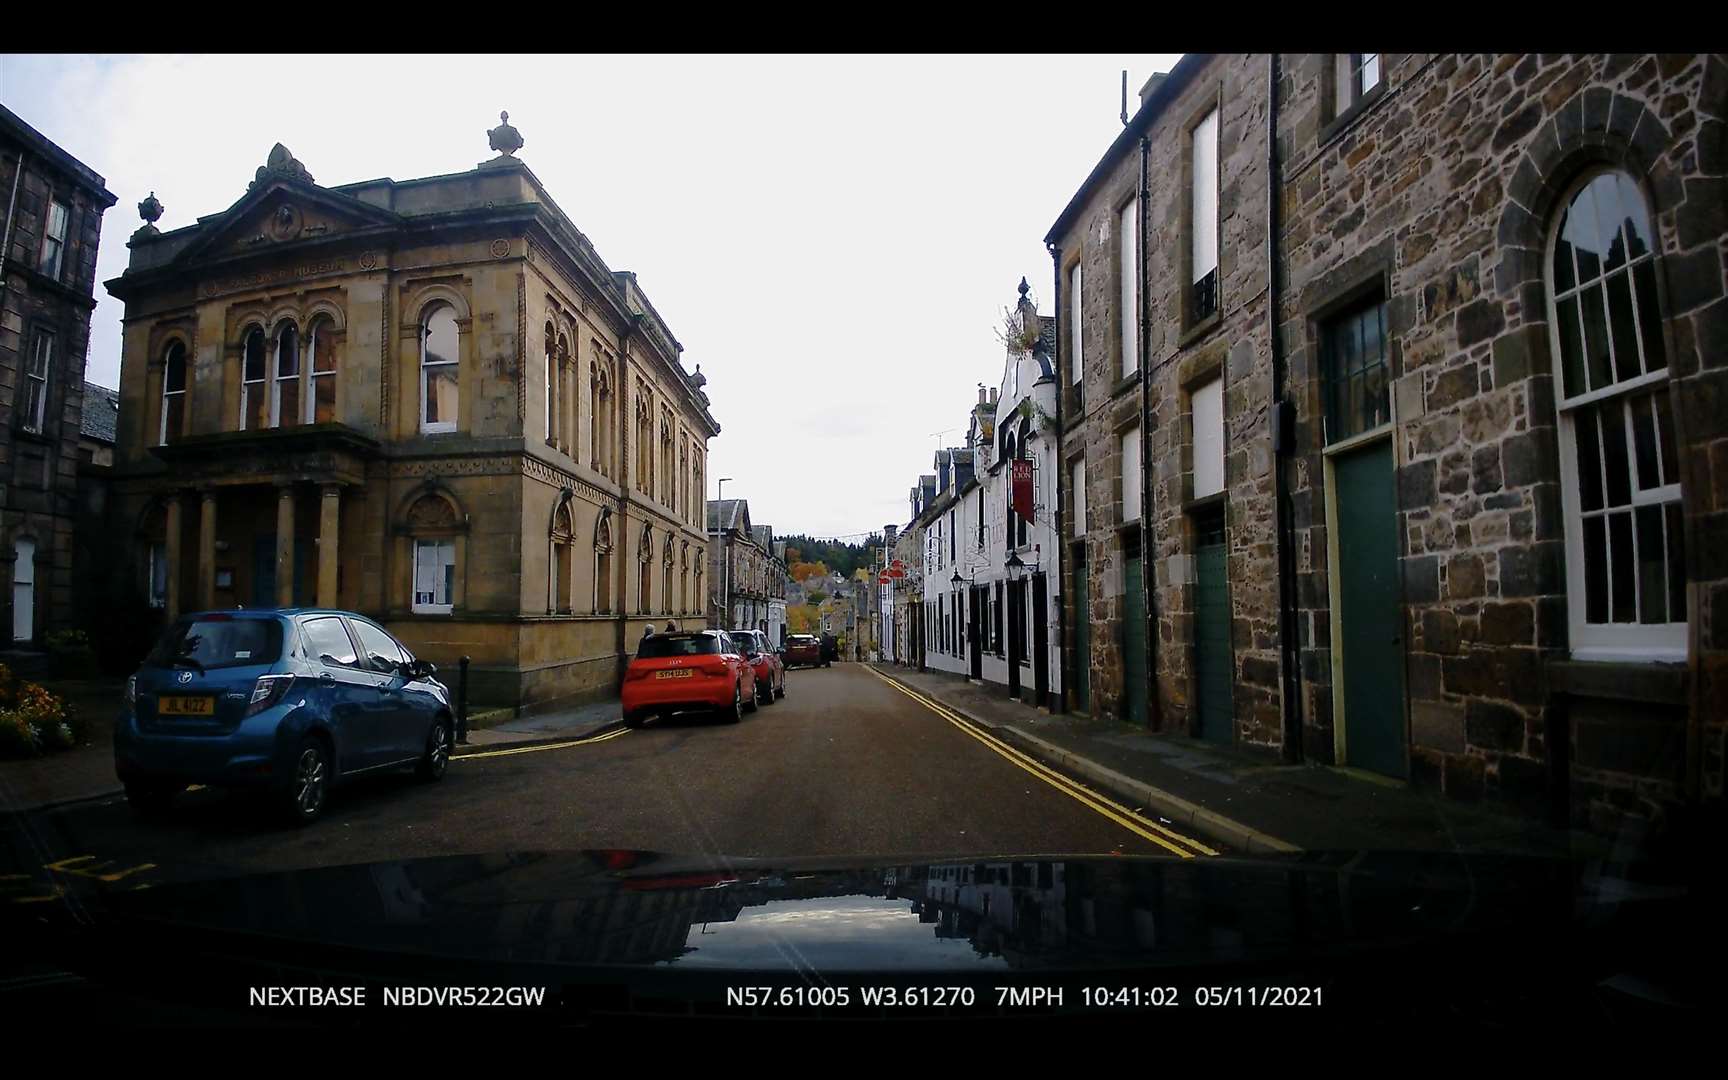 A reader's snap of a busy morning on Tolbooth Street, despite double yellow lines prohibiting parking.